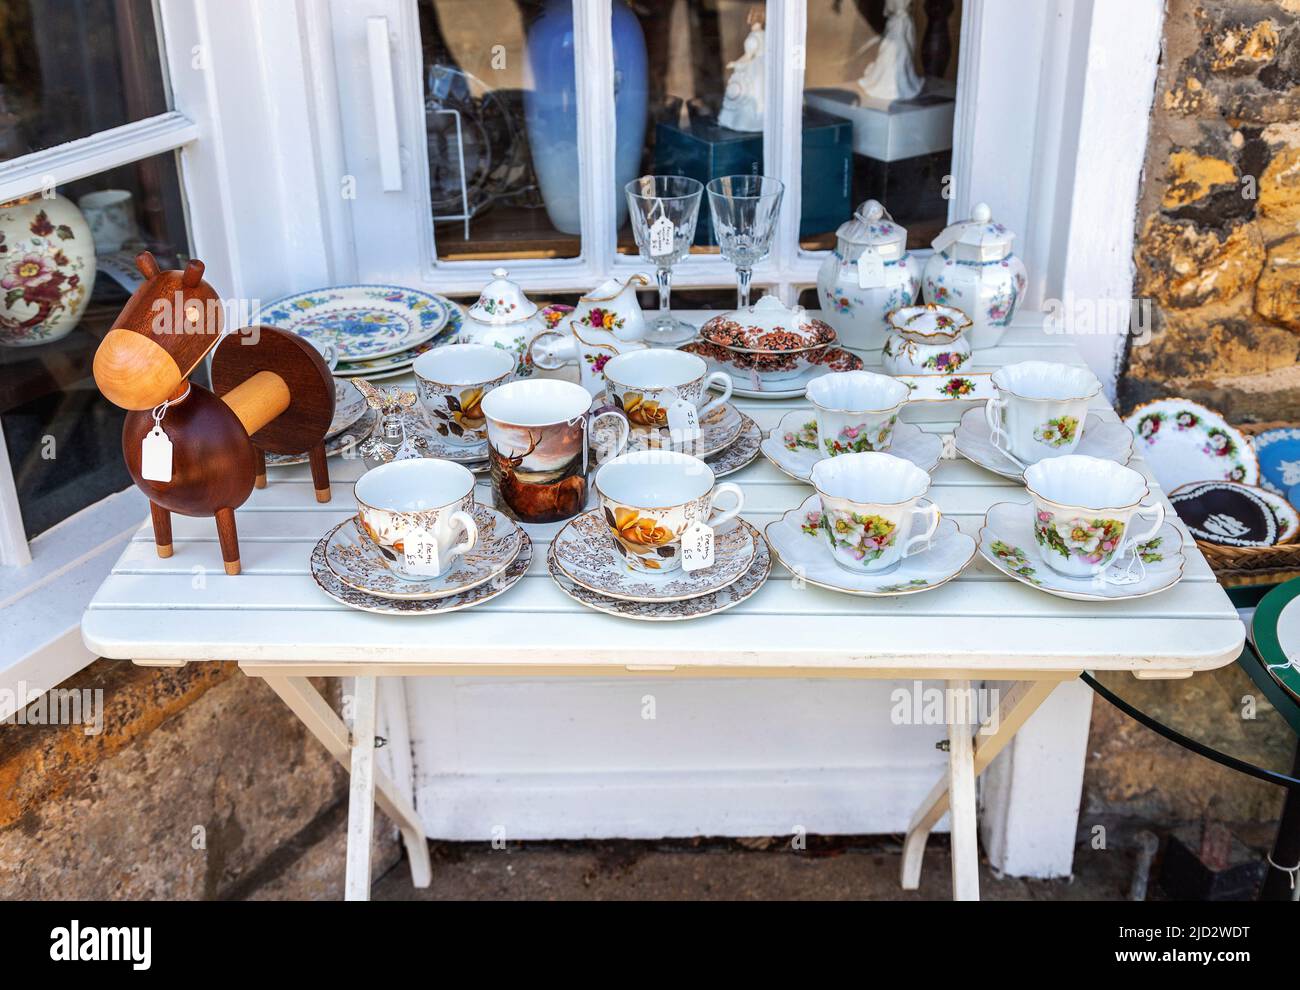 Outdoor display of second hand crockery, etc. for sale in Bourton-on-the-Water, Cotswolds, Gloucestershire, Midlands, England, United Kingdom. Stock Photo